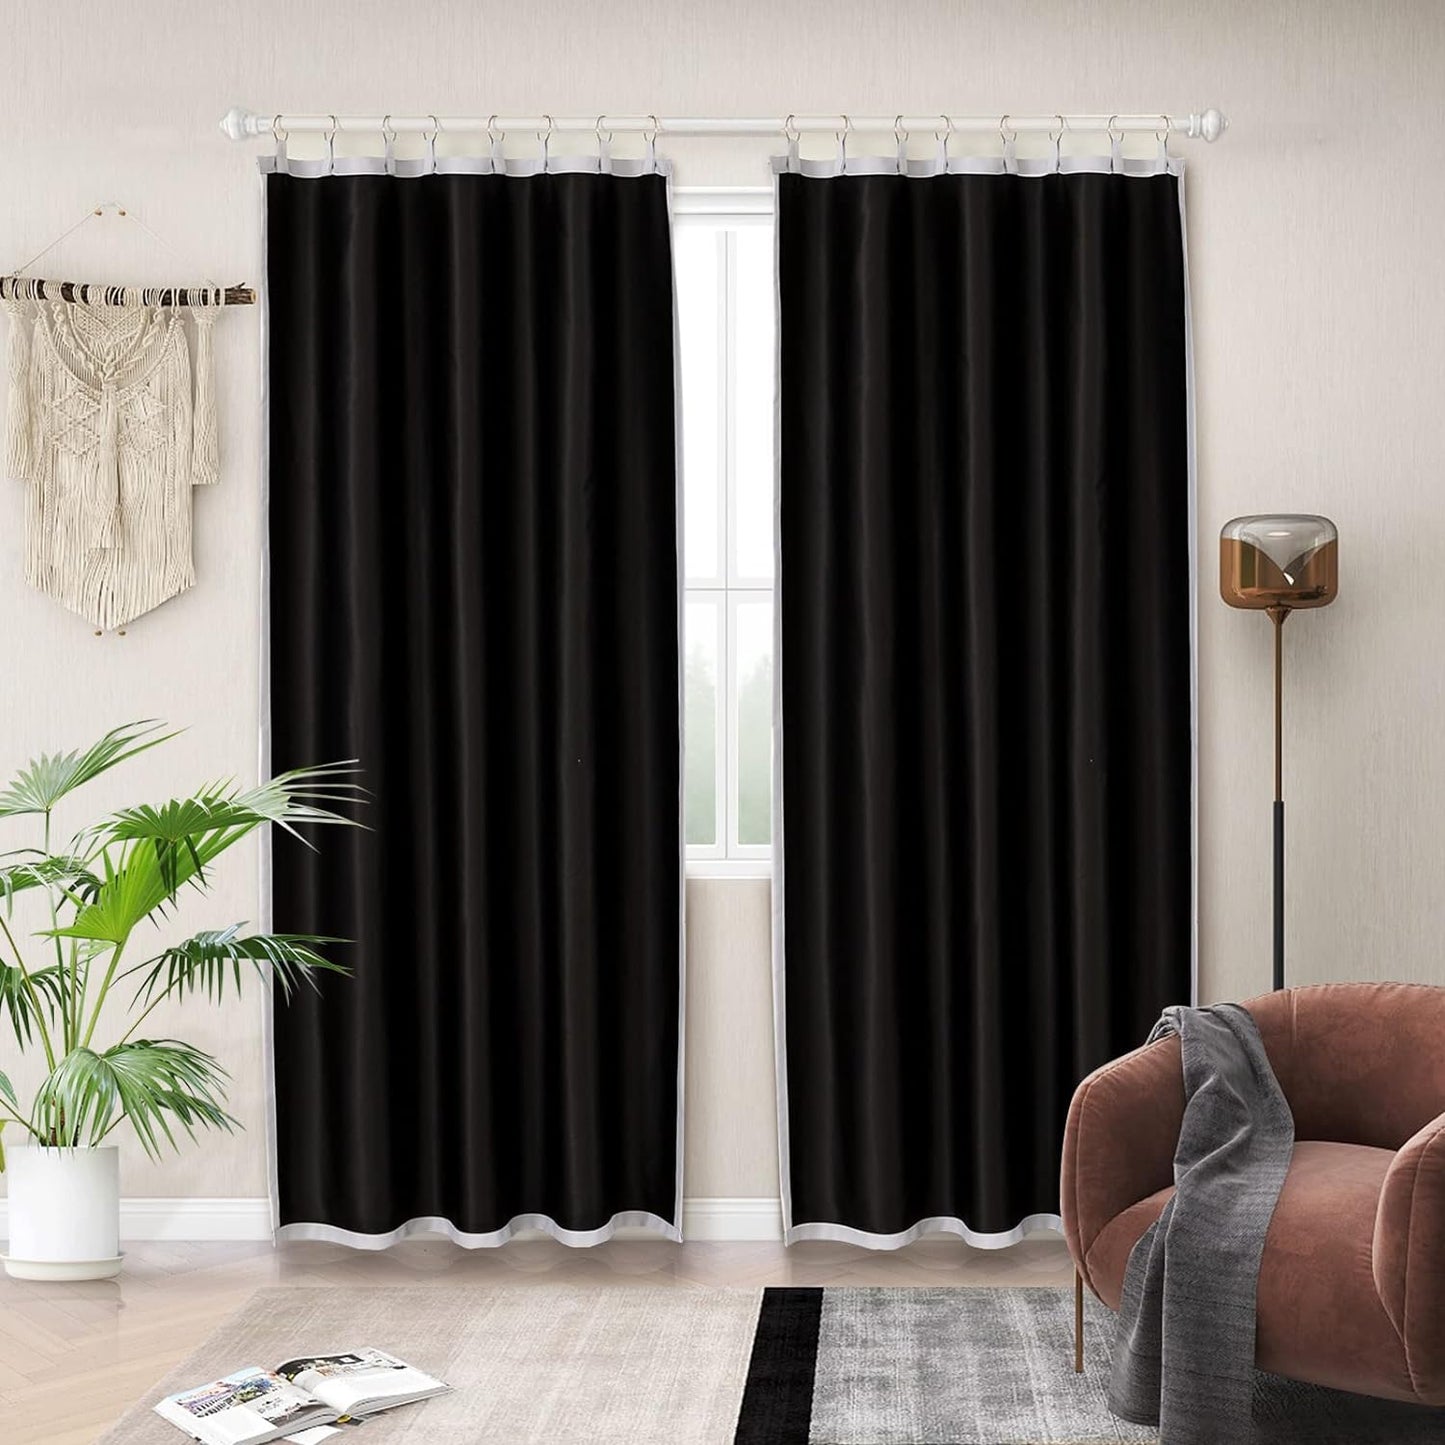 Melodieux Thermal Insulated Room Darkening Curtain Liner for 84 Inch Long Curtains, off White, 40 by 80 Inch, 1 Panel, Rings Included  Melodieux Off White/Black 50"Wx92"Lx2 